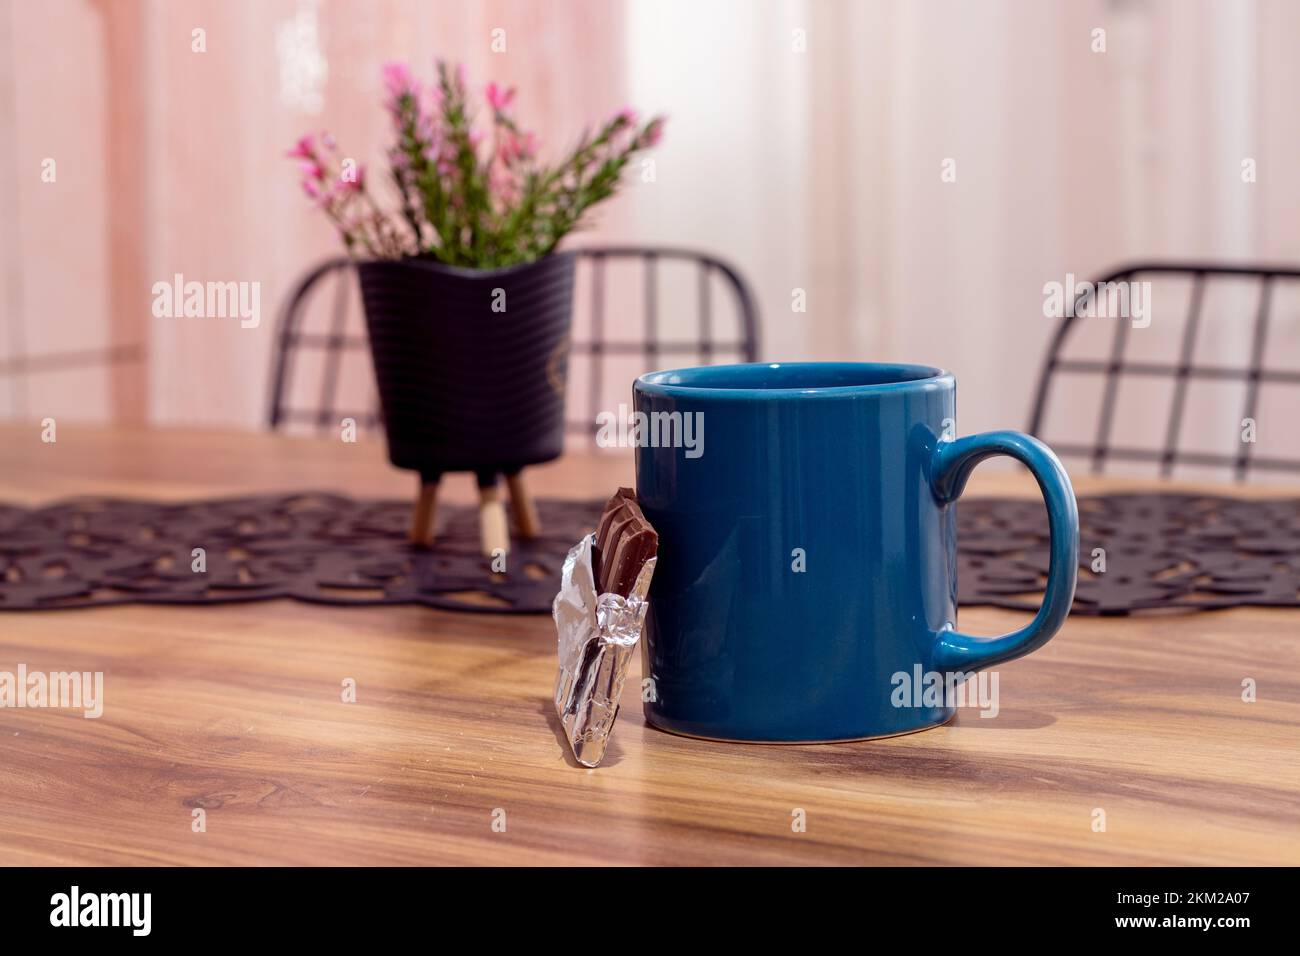 Coffee mug and chocolate on wooden table against curtain and chair background. Side view, copy space, close-up. Kitchen dining table, break concept Stock Photo